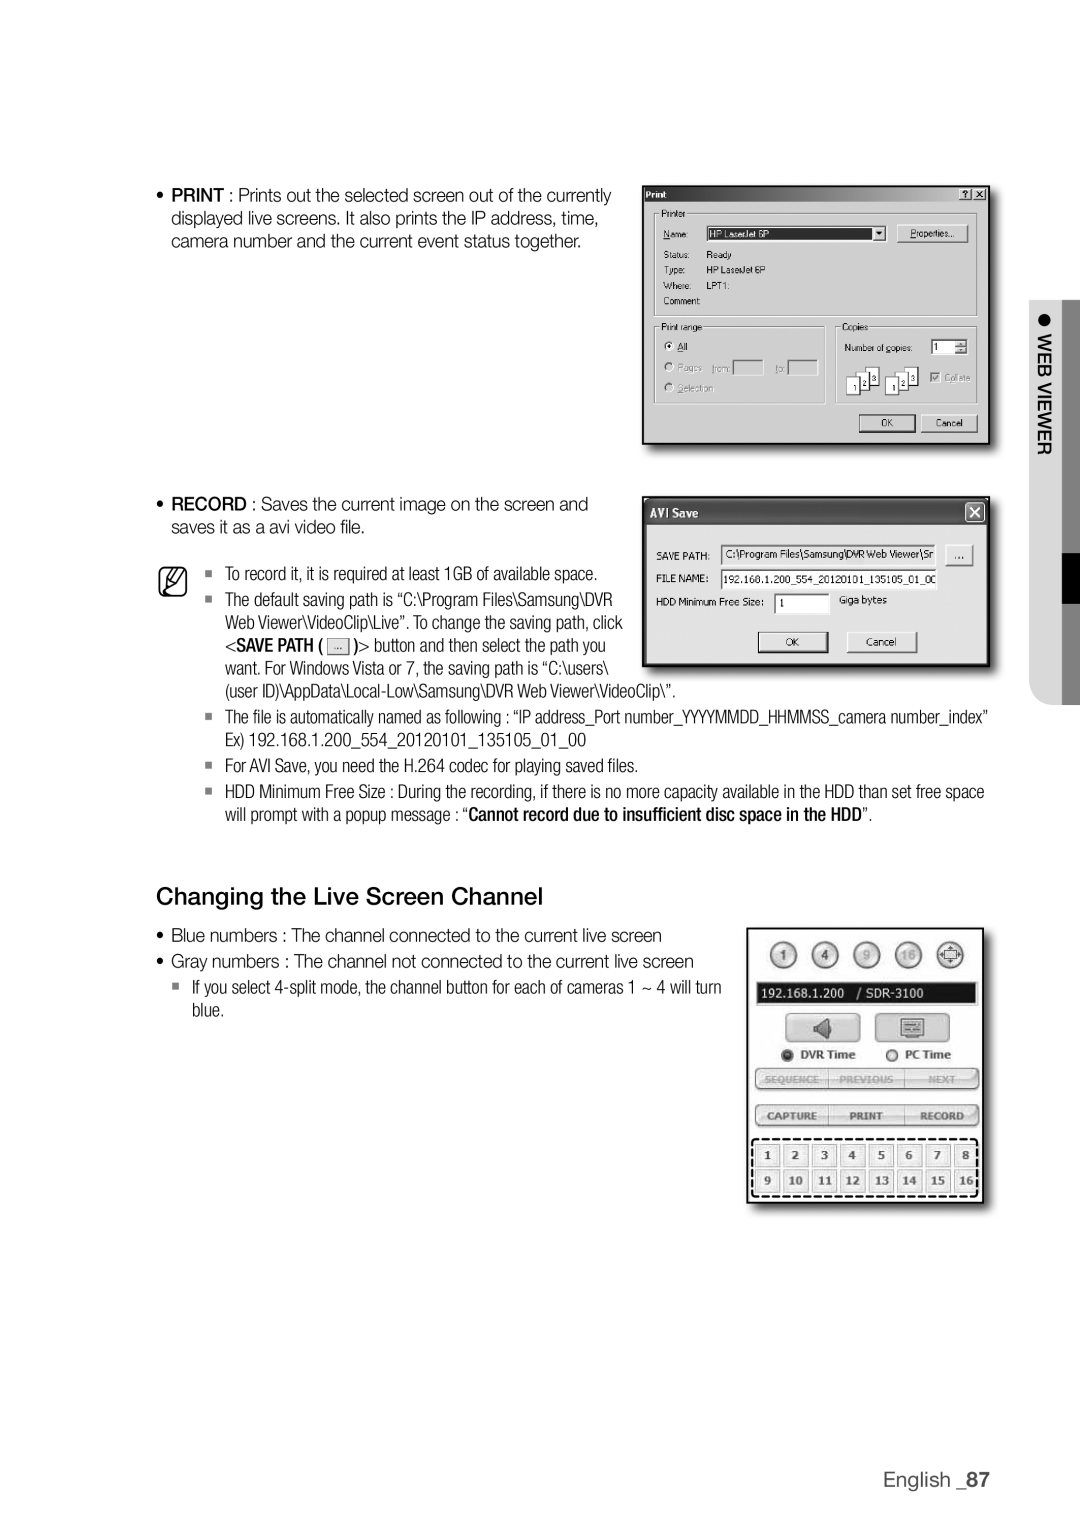 Samsung SDR3100 user manual changing the live Screen channel, English _87 